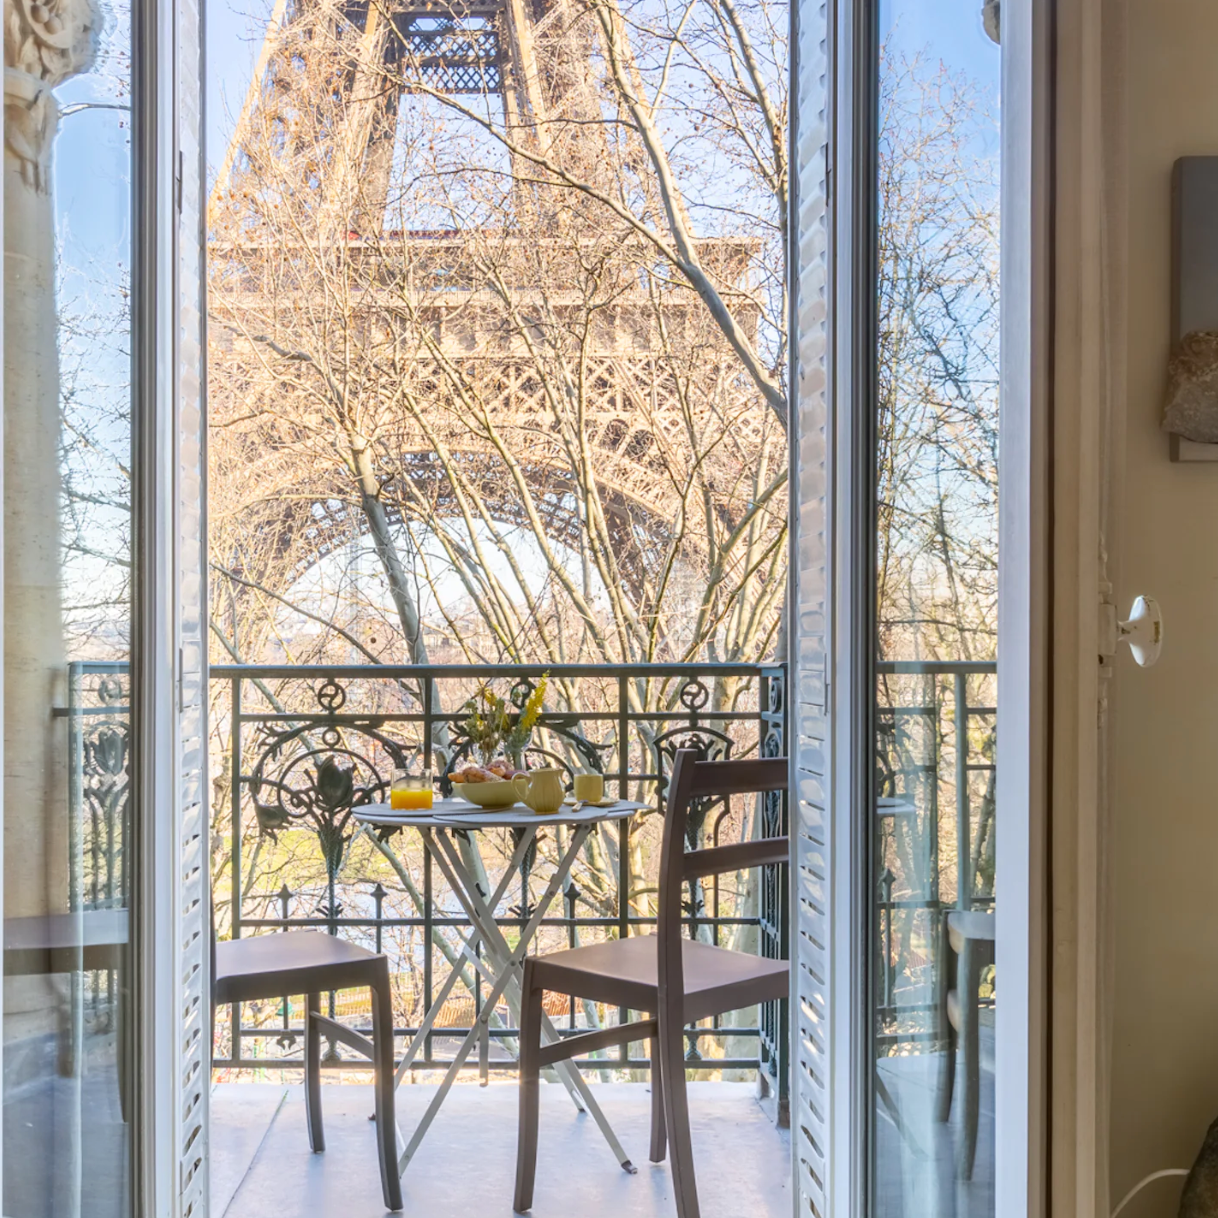 The best Airbnbs and rentals in Paris